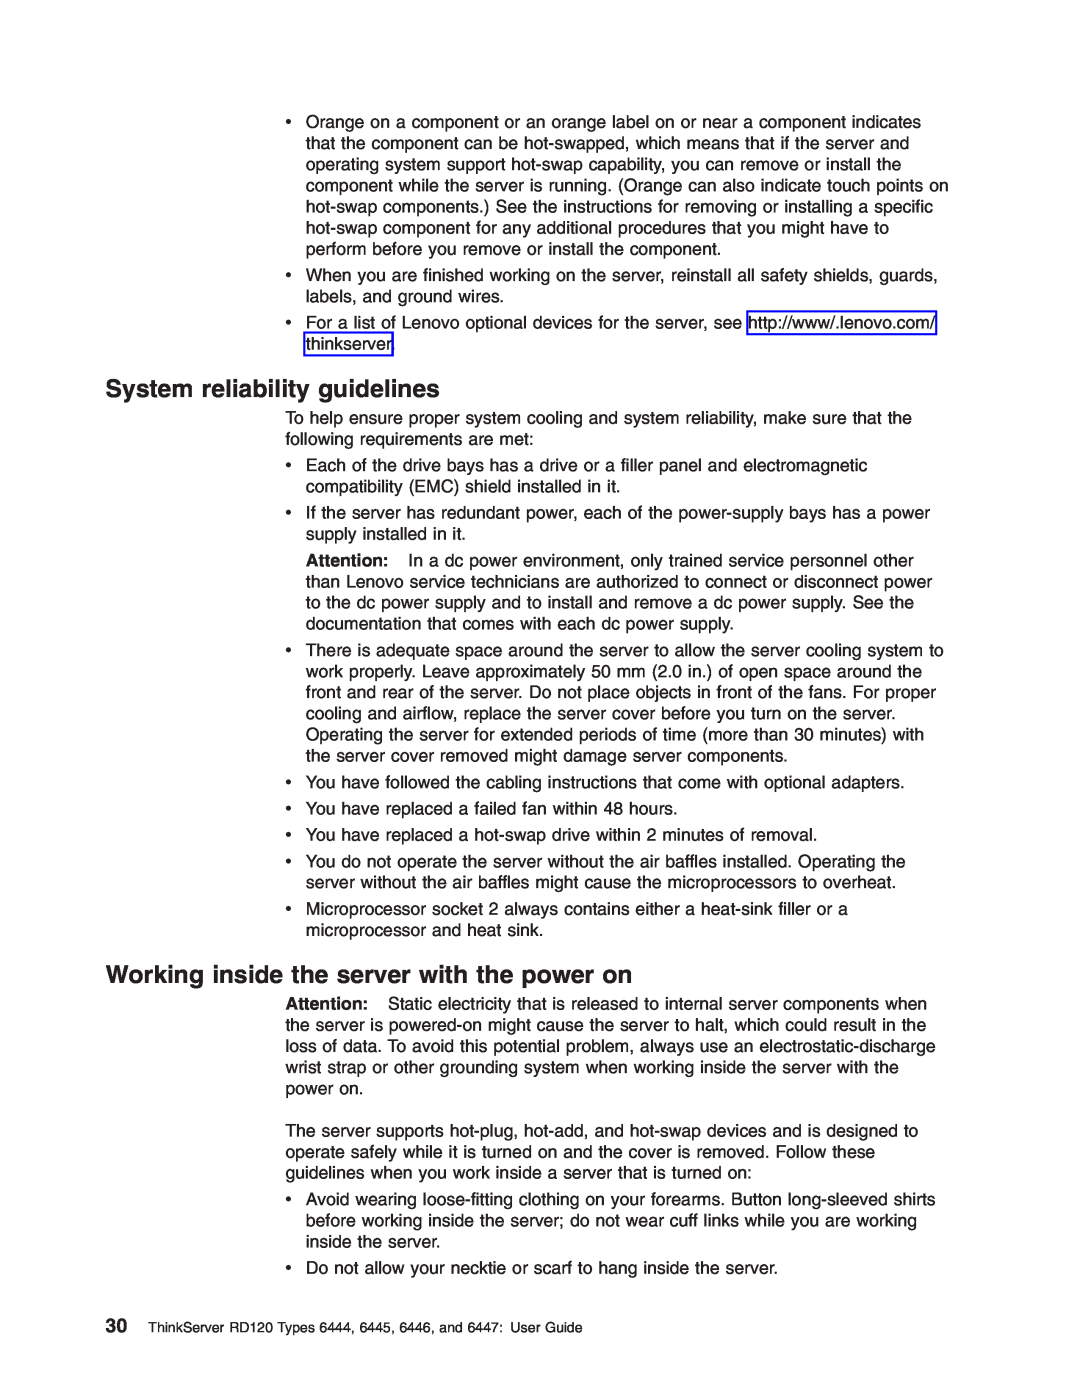 Lenovo RD120 manual System reliability guidelines, Working inside the server with the power on 